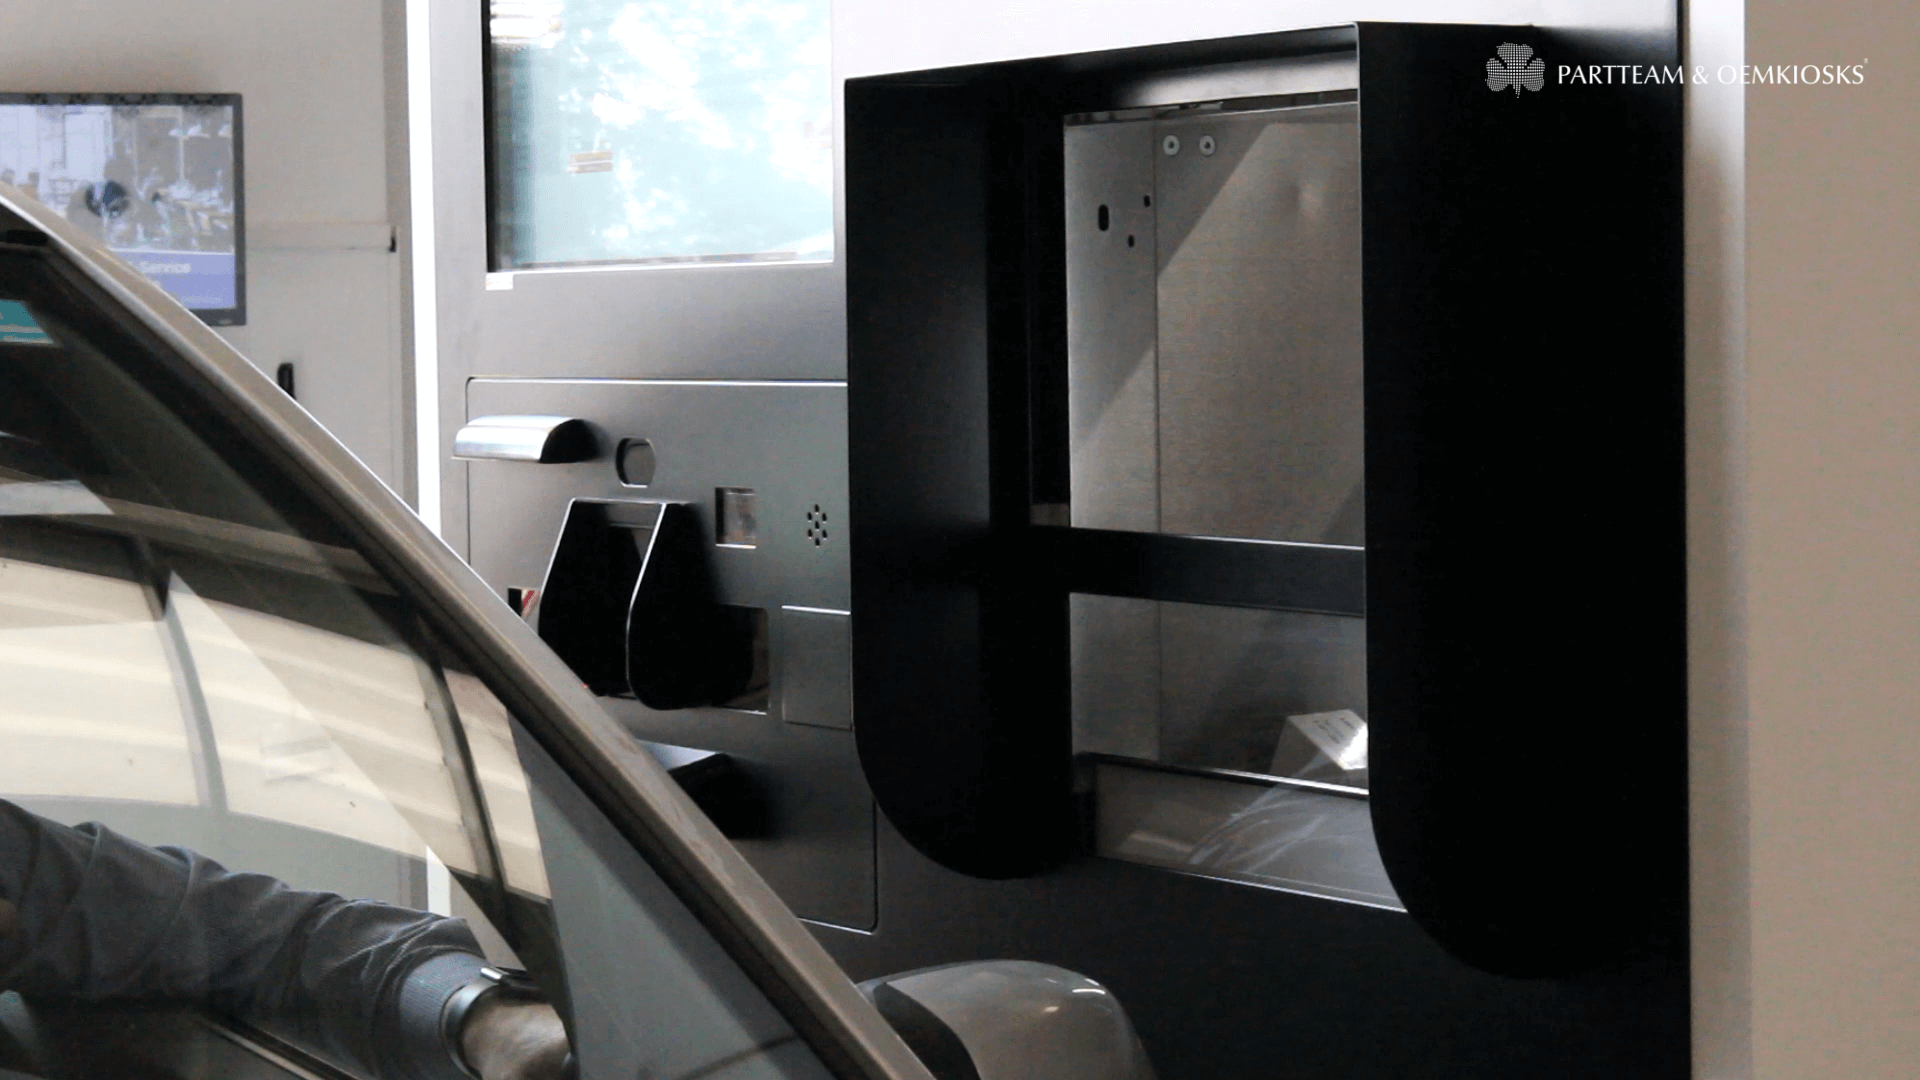 PHARMA COLLECT: The drive-thru medication dispenser kiosk produced by PARTTEAM & OEMKIOSKS